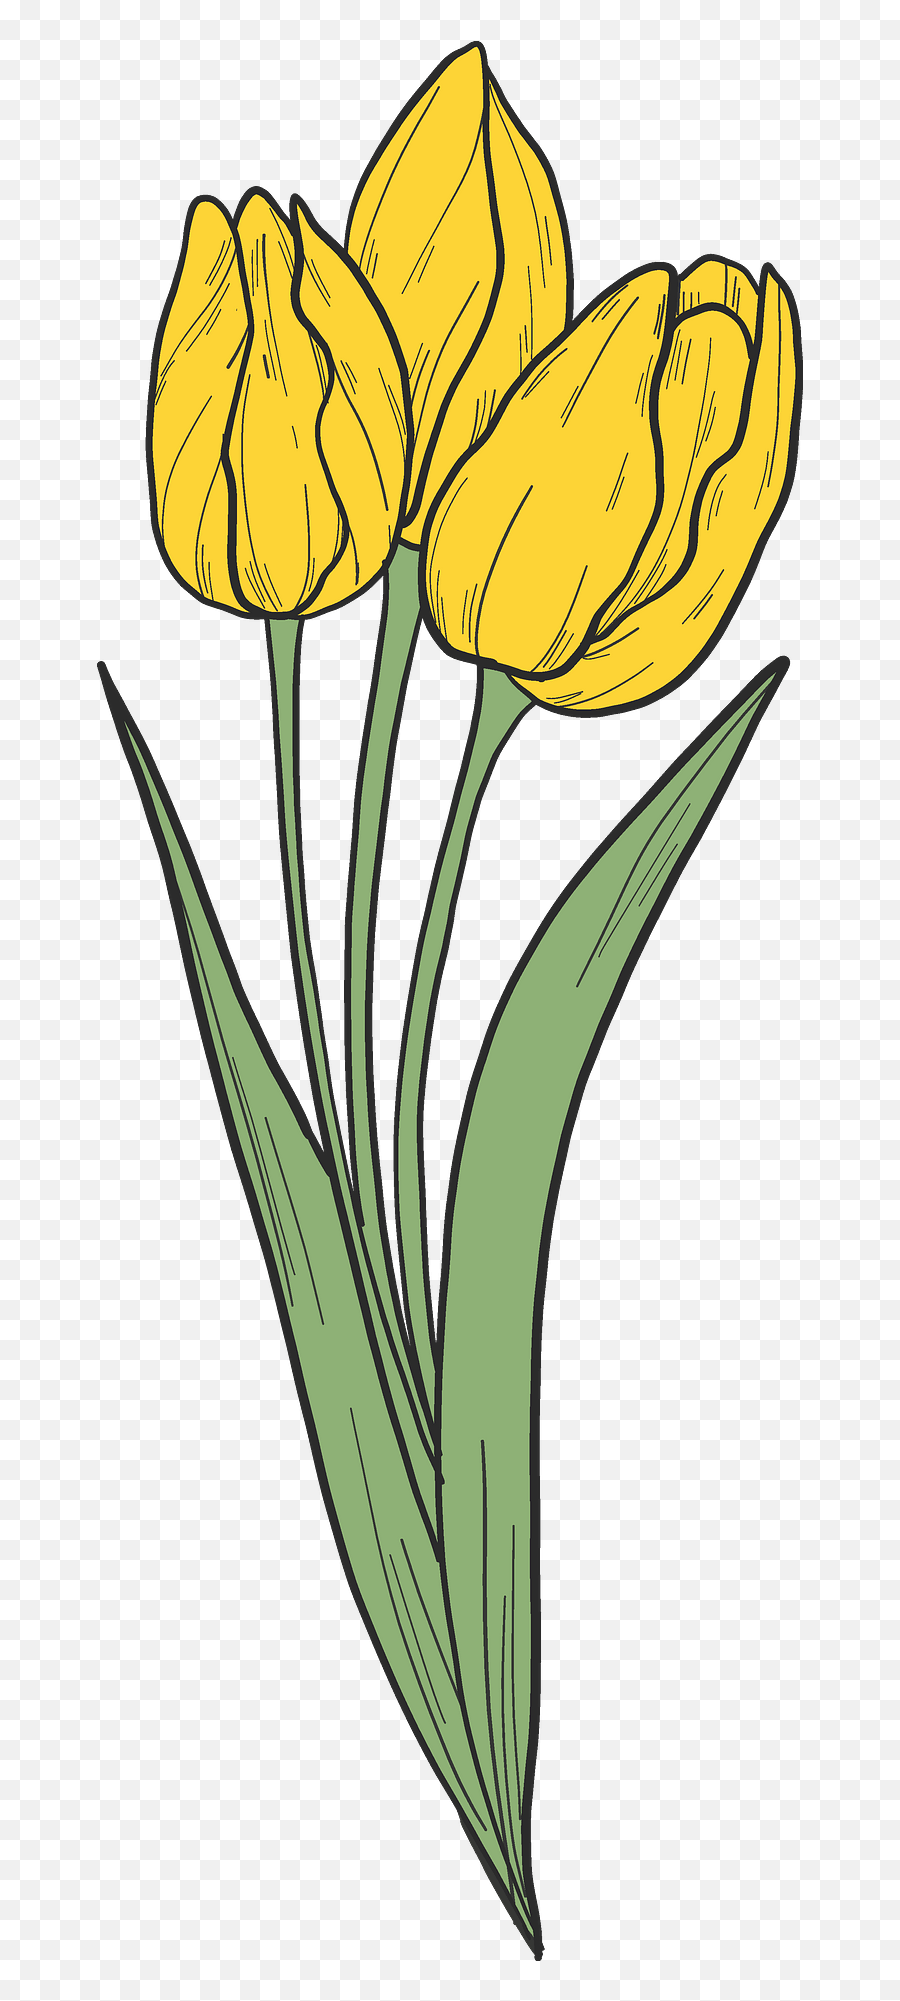 Bouquet Of Yellow Tulips Clipart Free Download Transparent - Tulip Emoji,Tulips Clipart